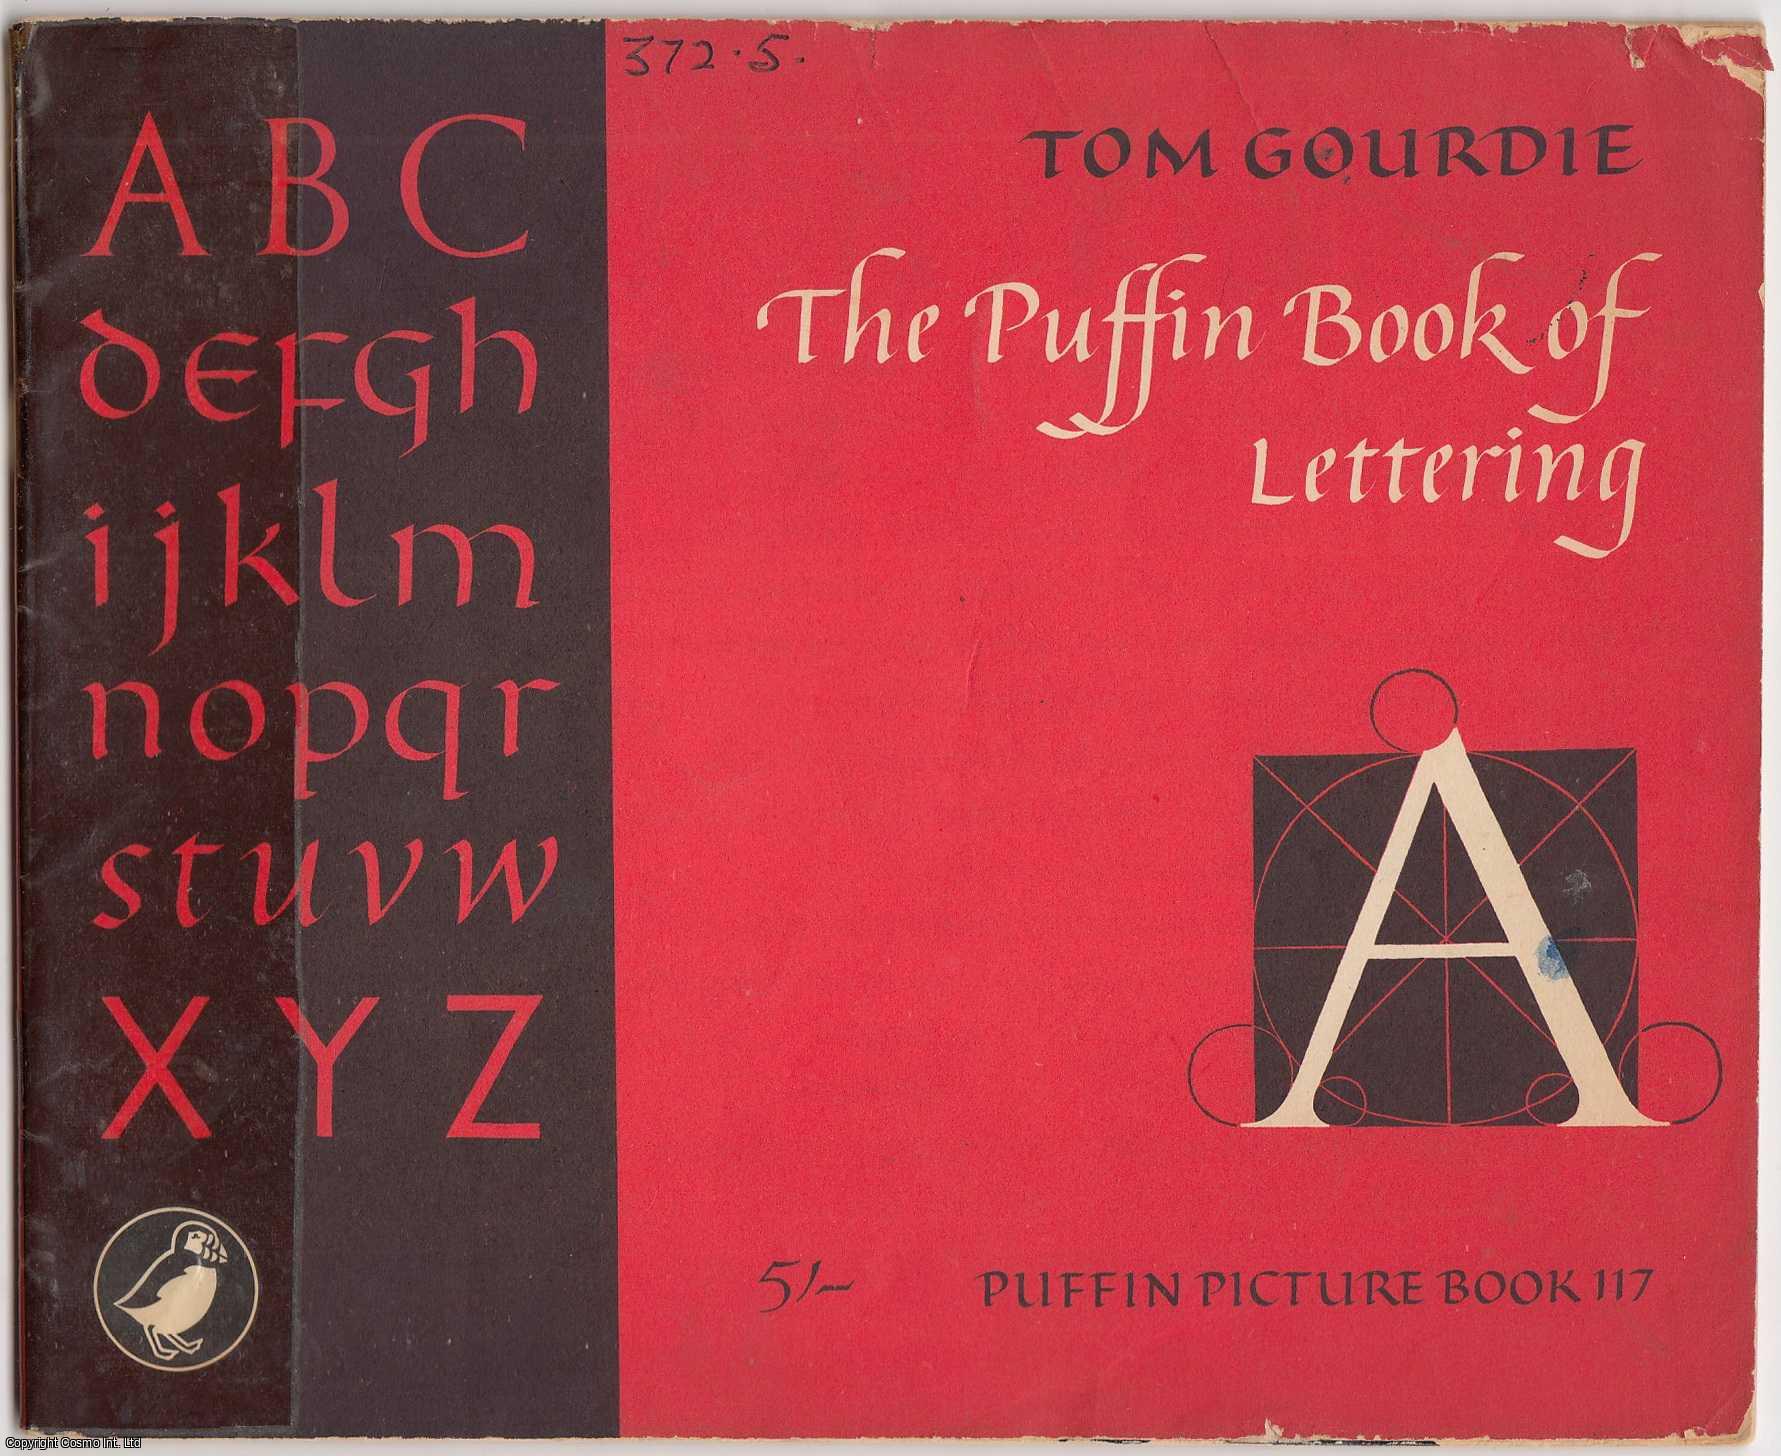 Tom Gourdie - The Puffin Book of Lettering.